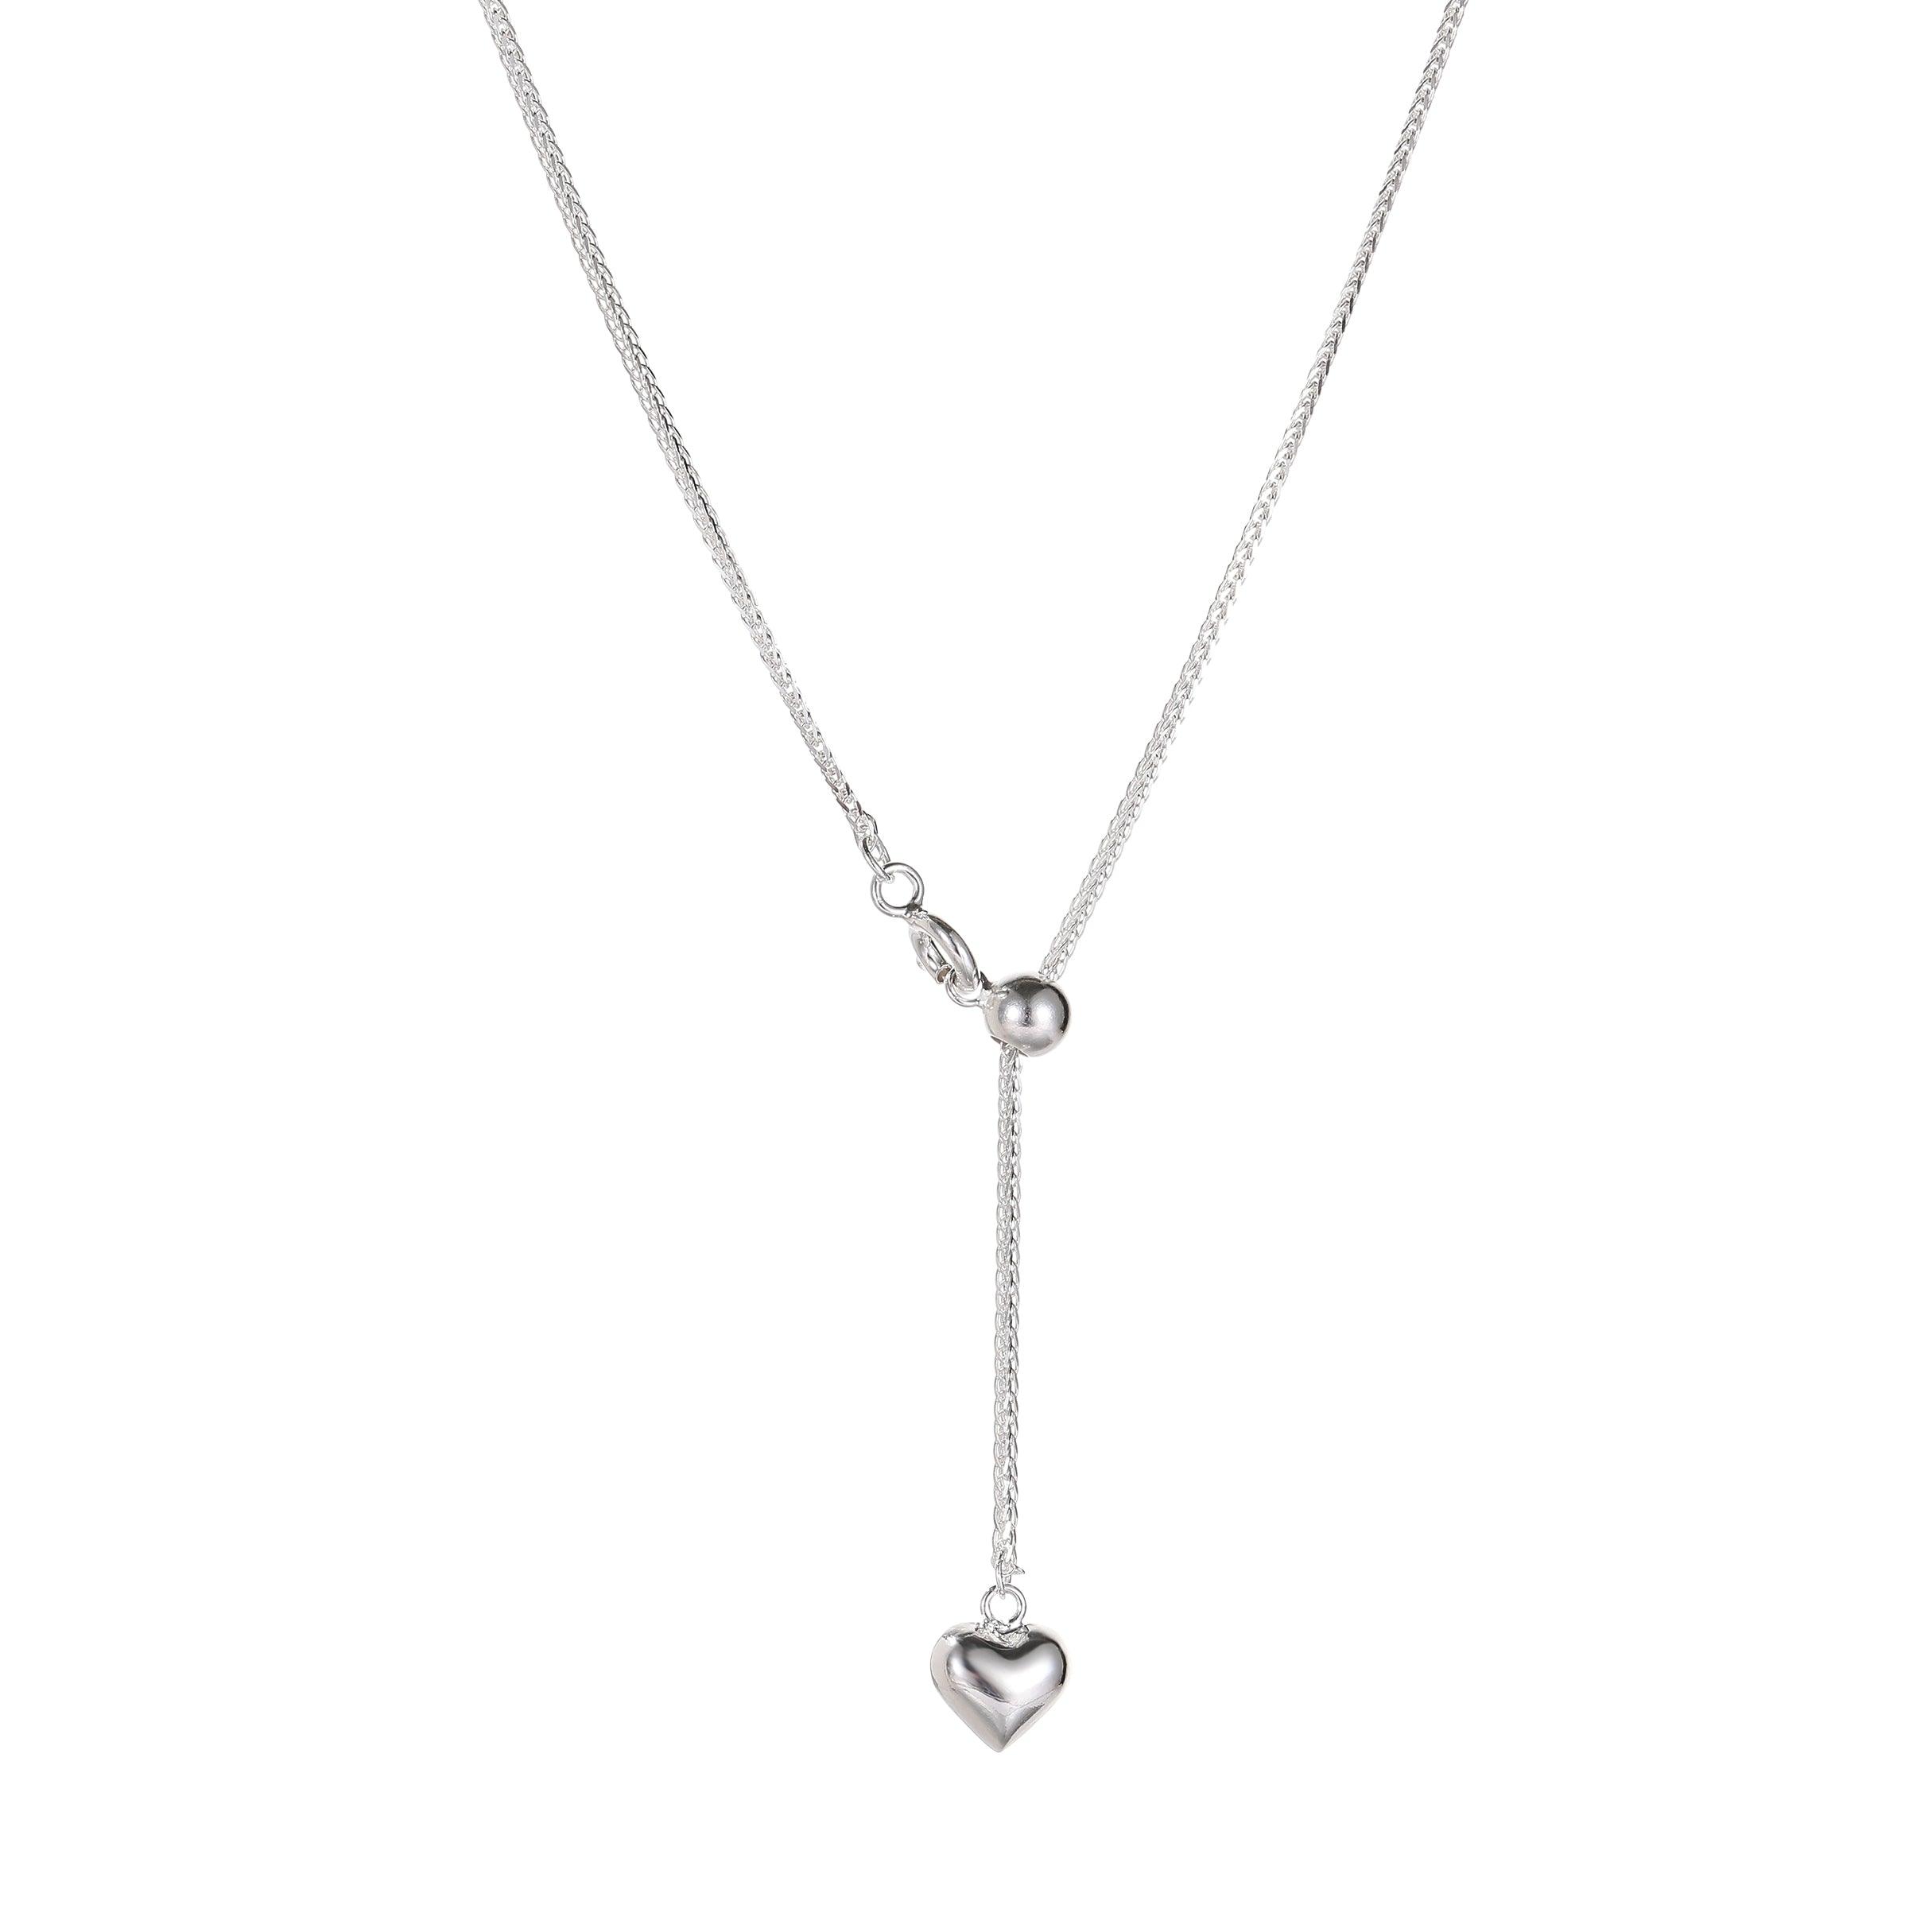 Heart Adjustable Length Sterling Silver Necklace - Uniqvibe